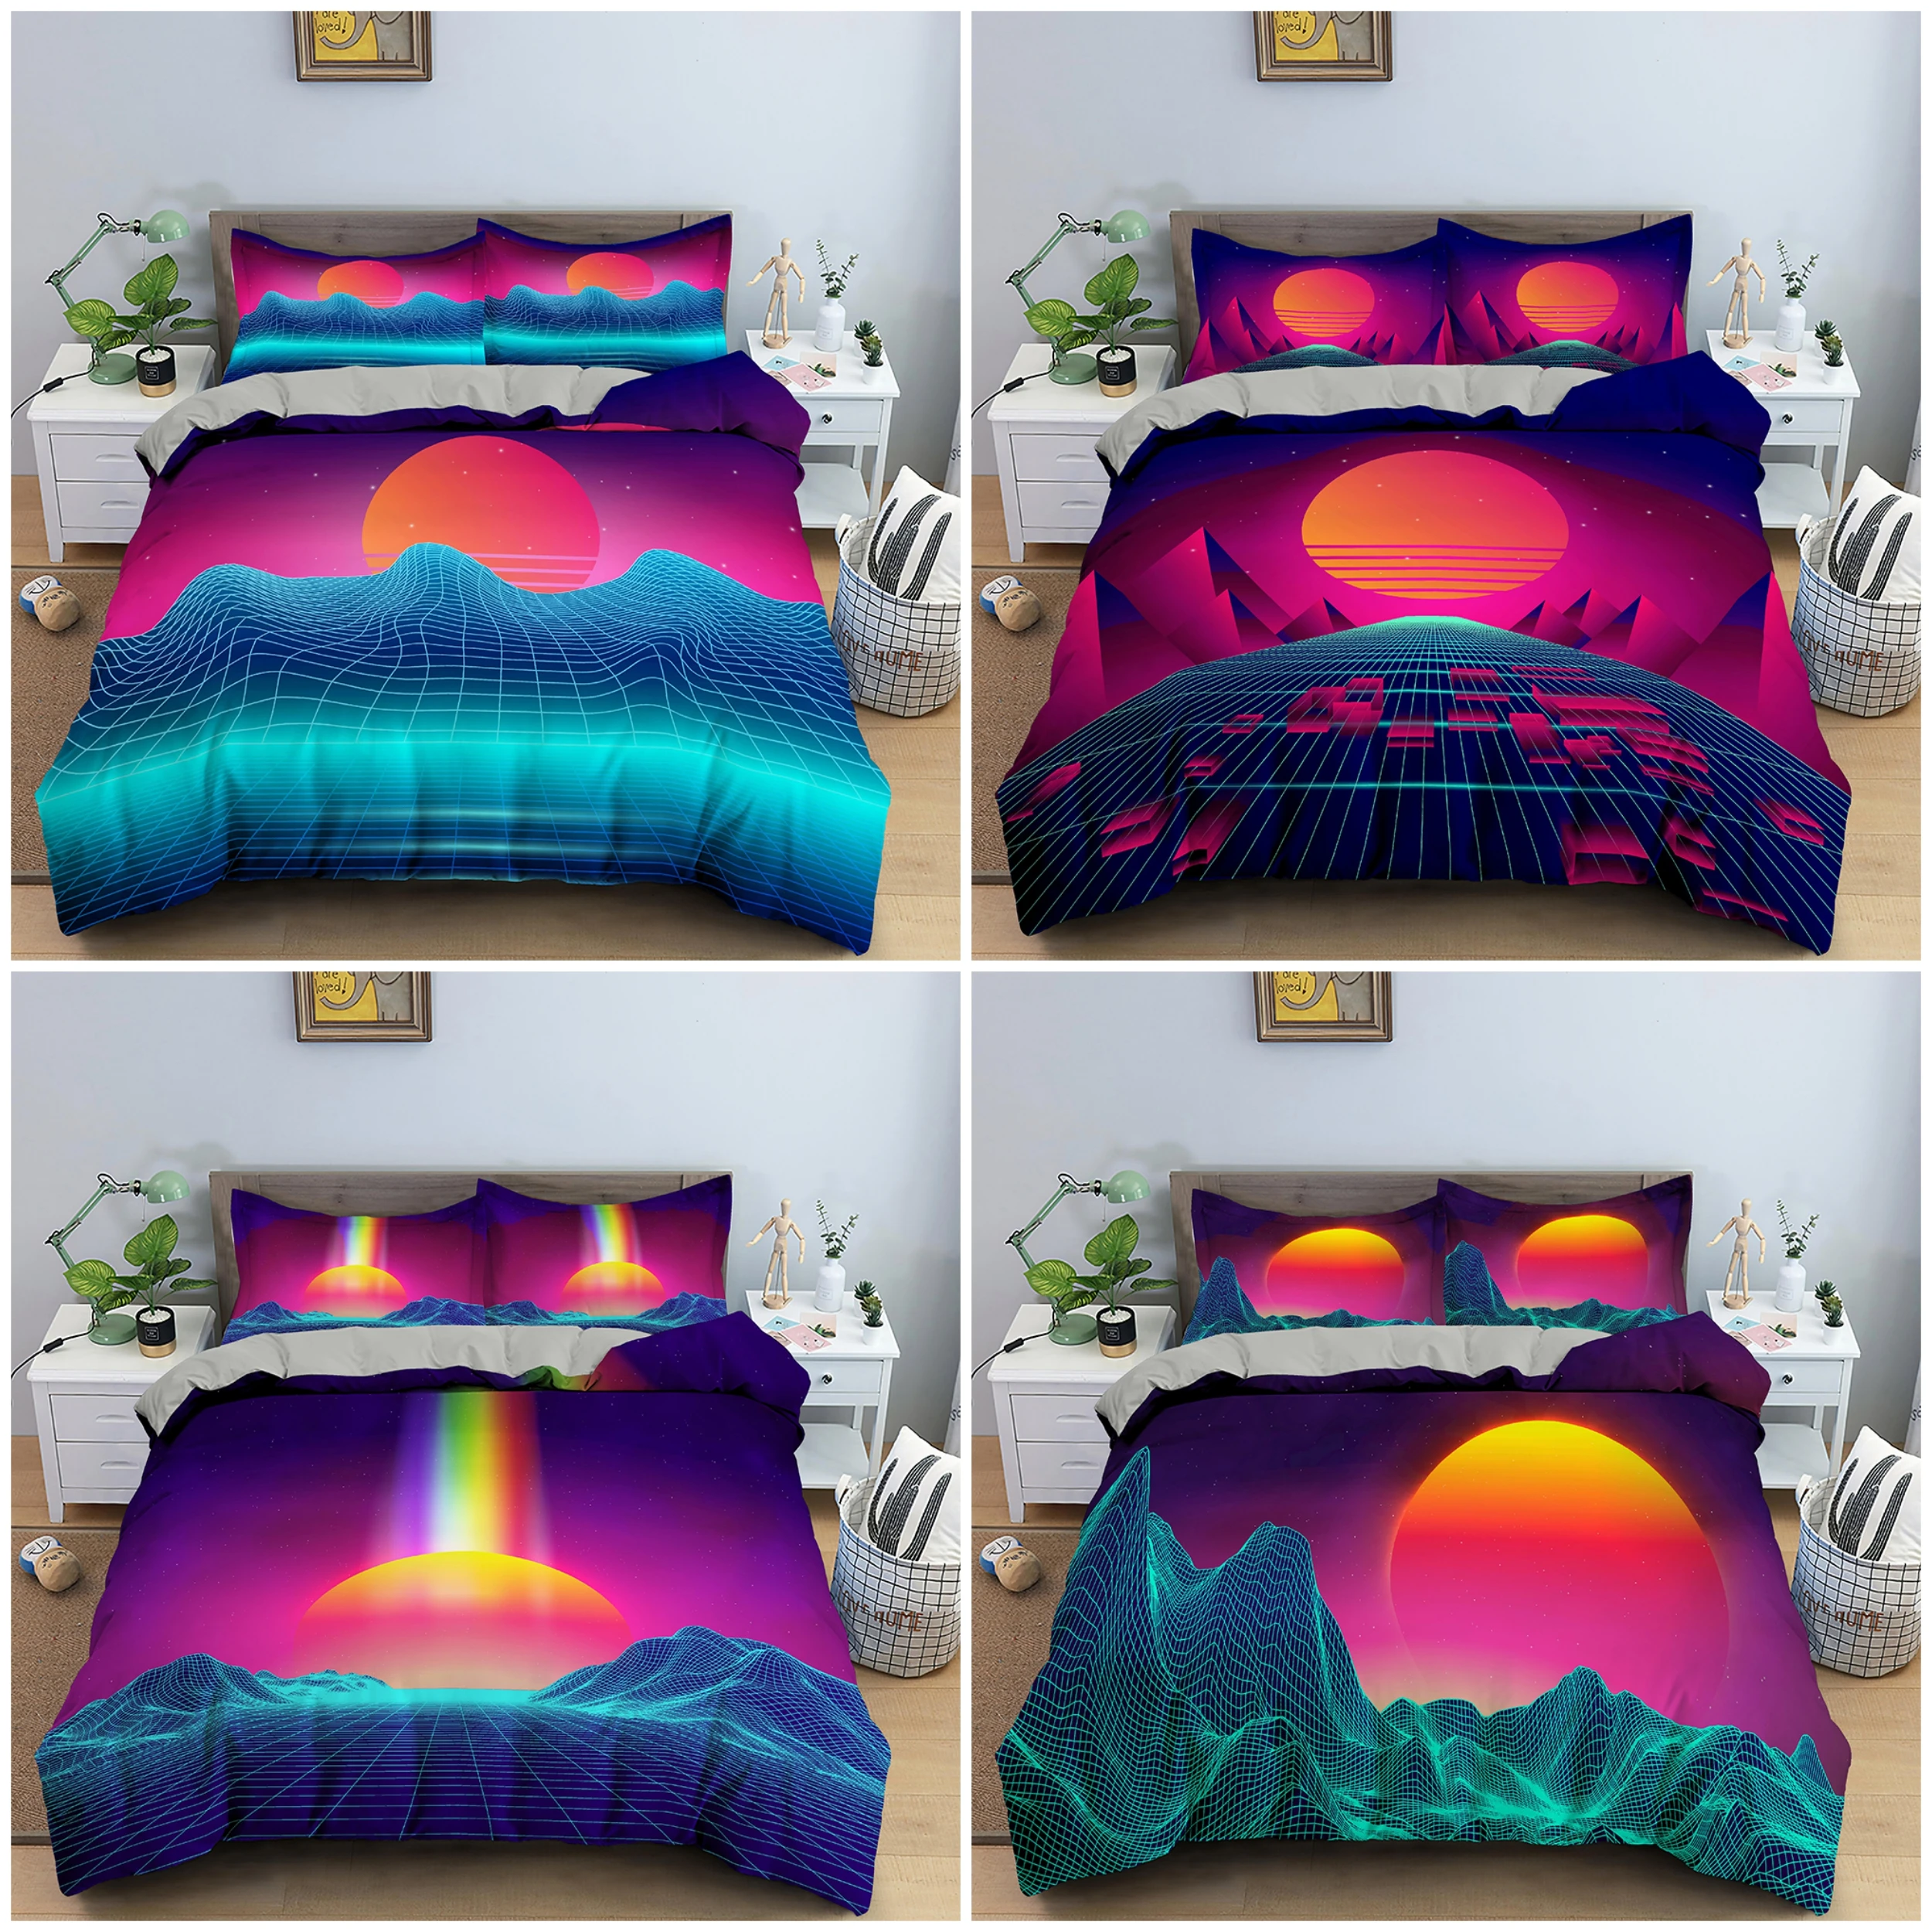 

Abstract Sunset Pattern Duvet Cover Soft Microfiber Bedding Set Comforter Cover Full Queen King Bedclothes Pillowcases 2/3pcs